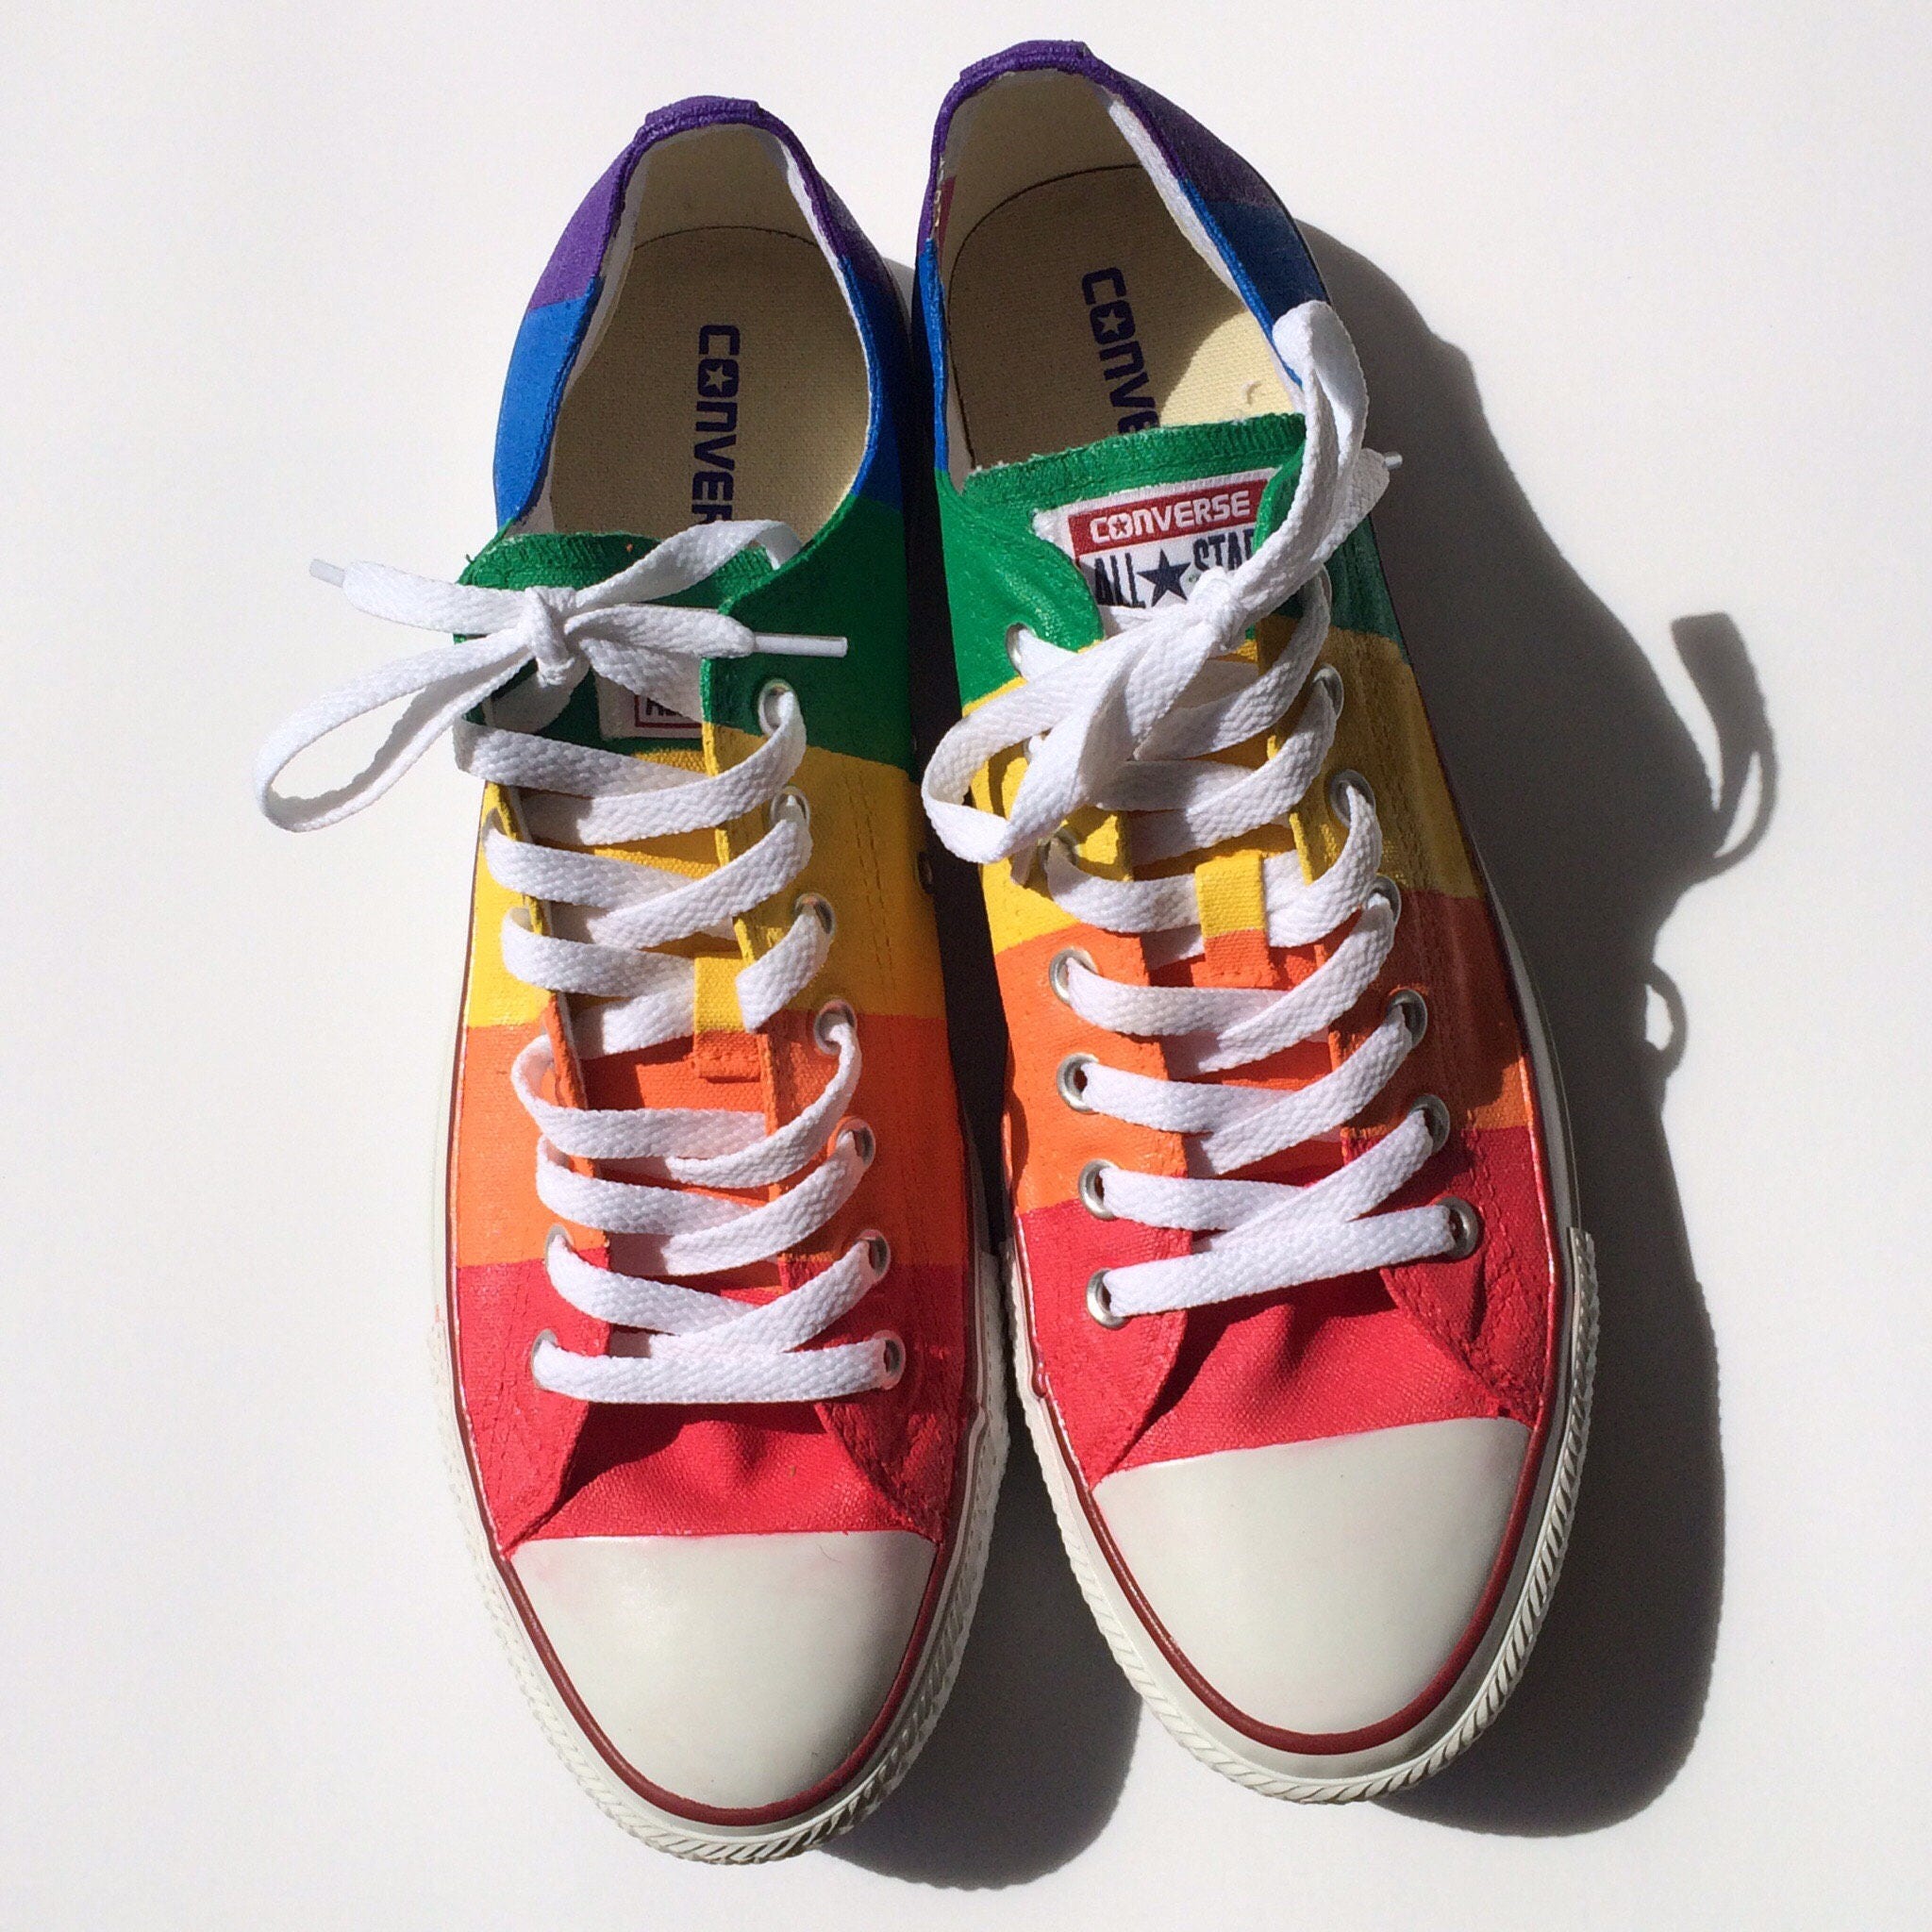 name brand gay pride shoes